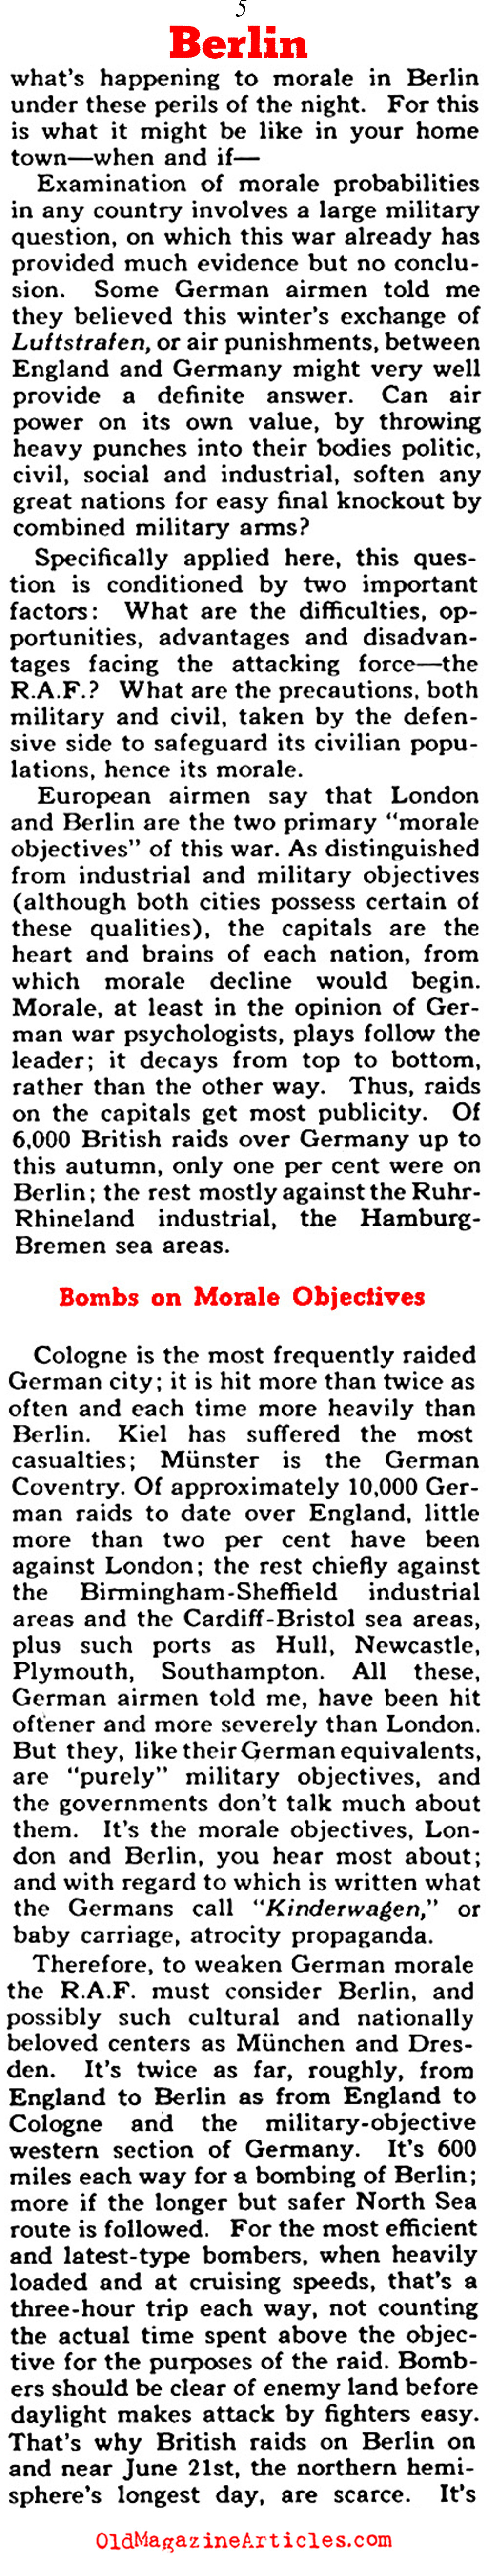 How Much Can the Germans Take? (Collier's Magazine, 1941)